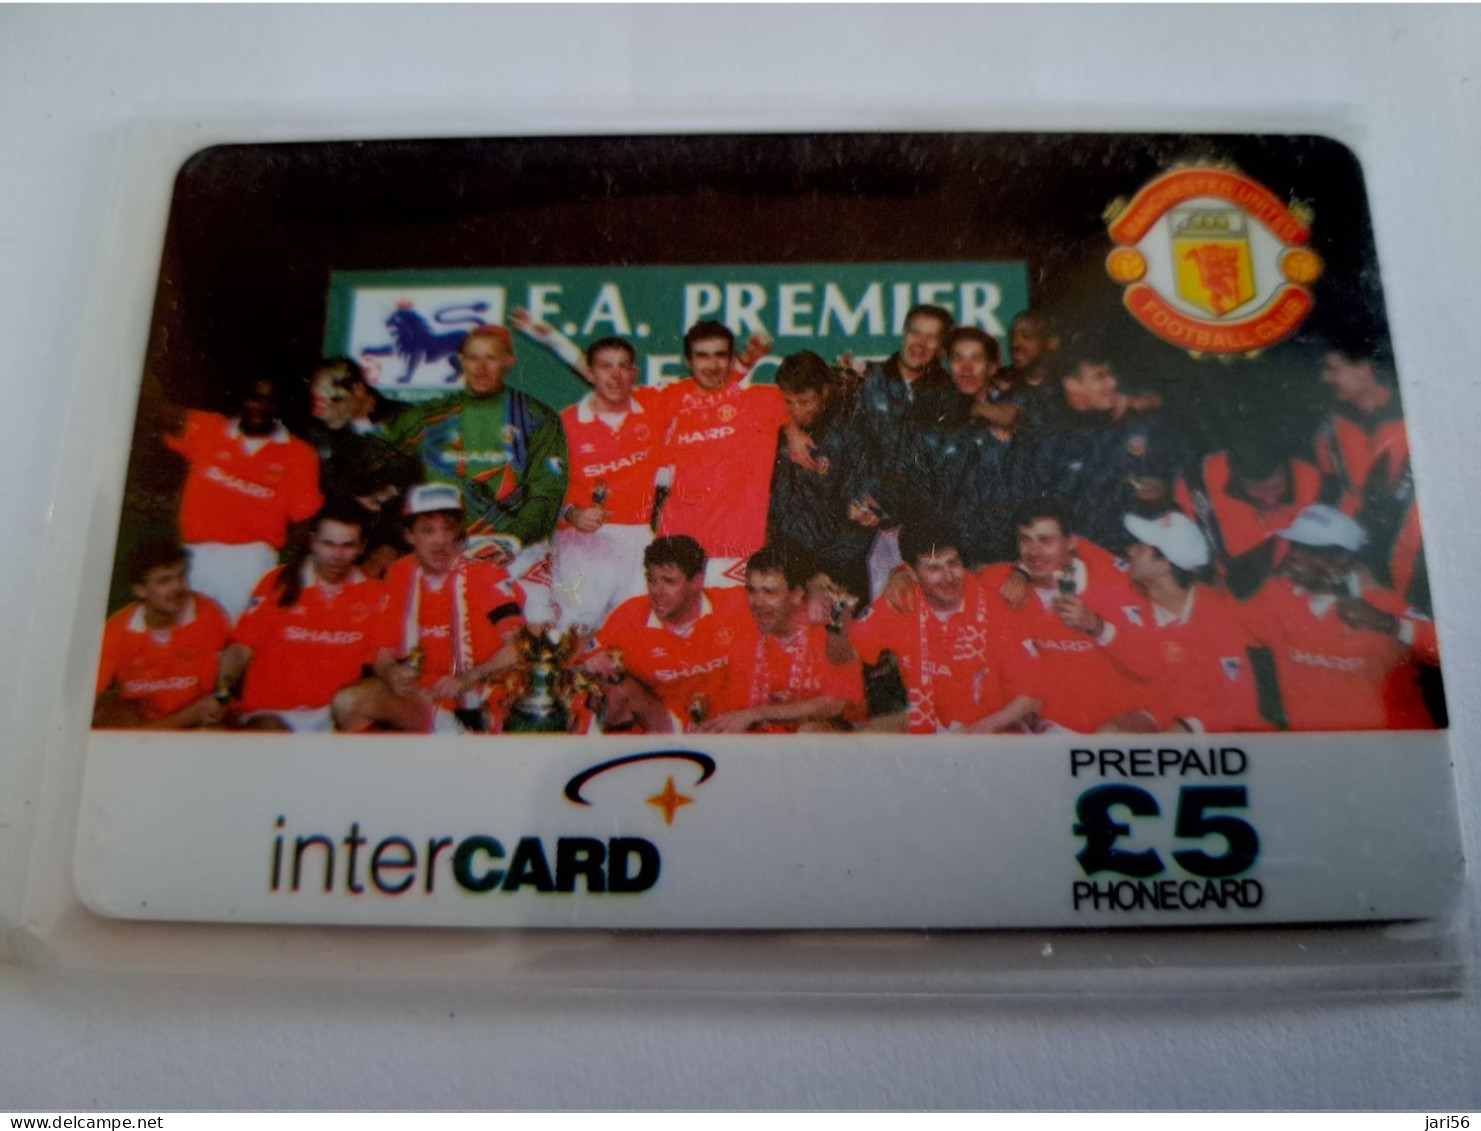 GREAT BRITAIN / 5 POUND  /  INTERCARD/ MACHESTER UNITED/ FOOTBAL/SOCCER /     /    PREPAID CARD/ MINT  **15718** - [10] Collections